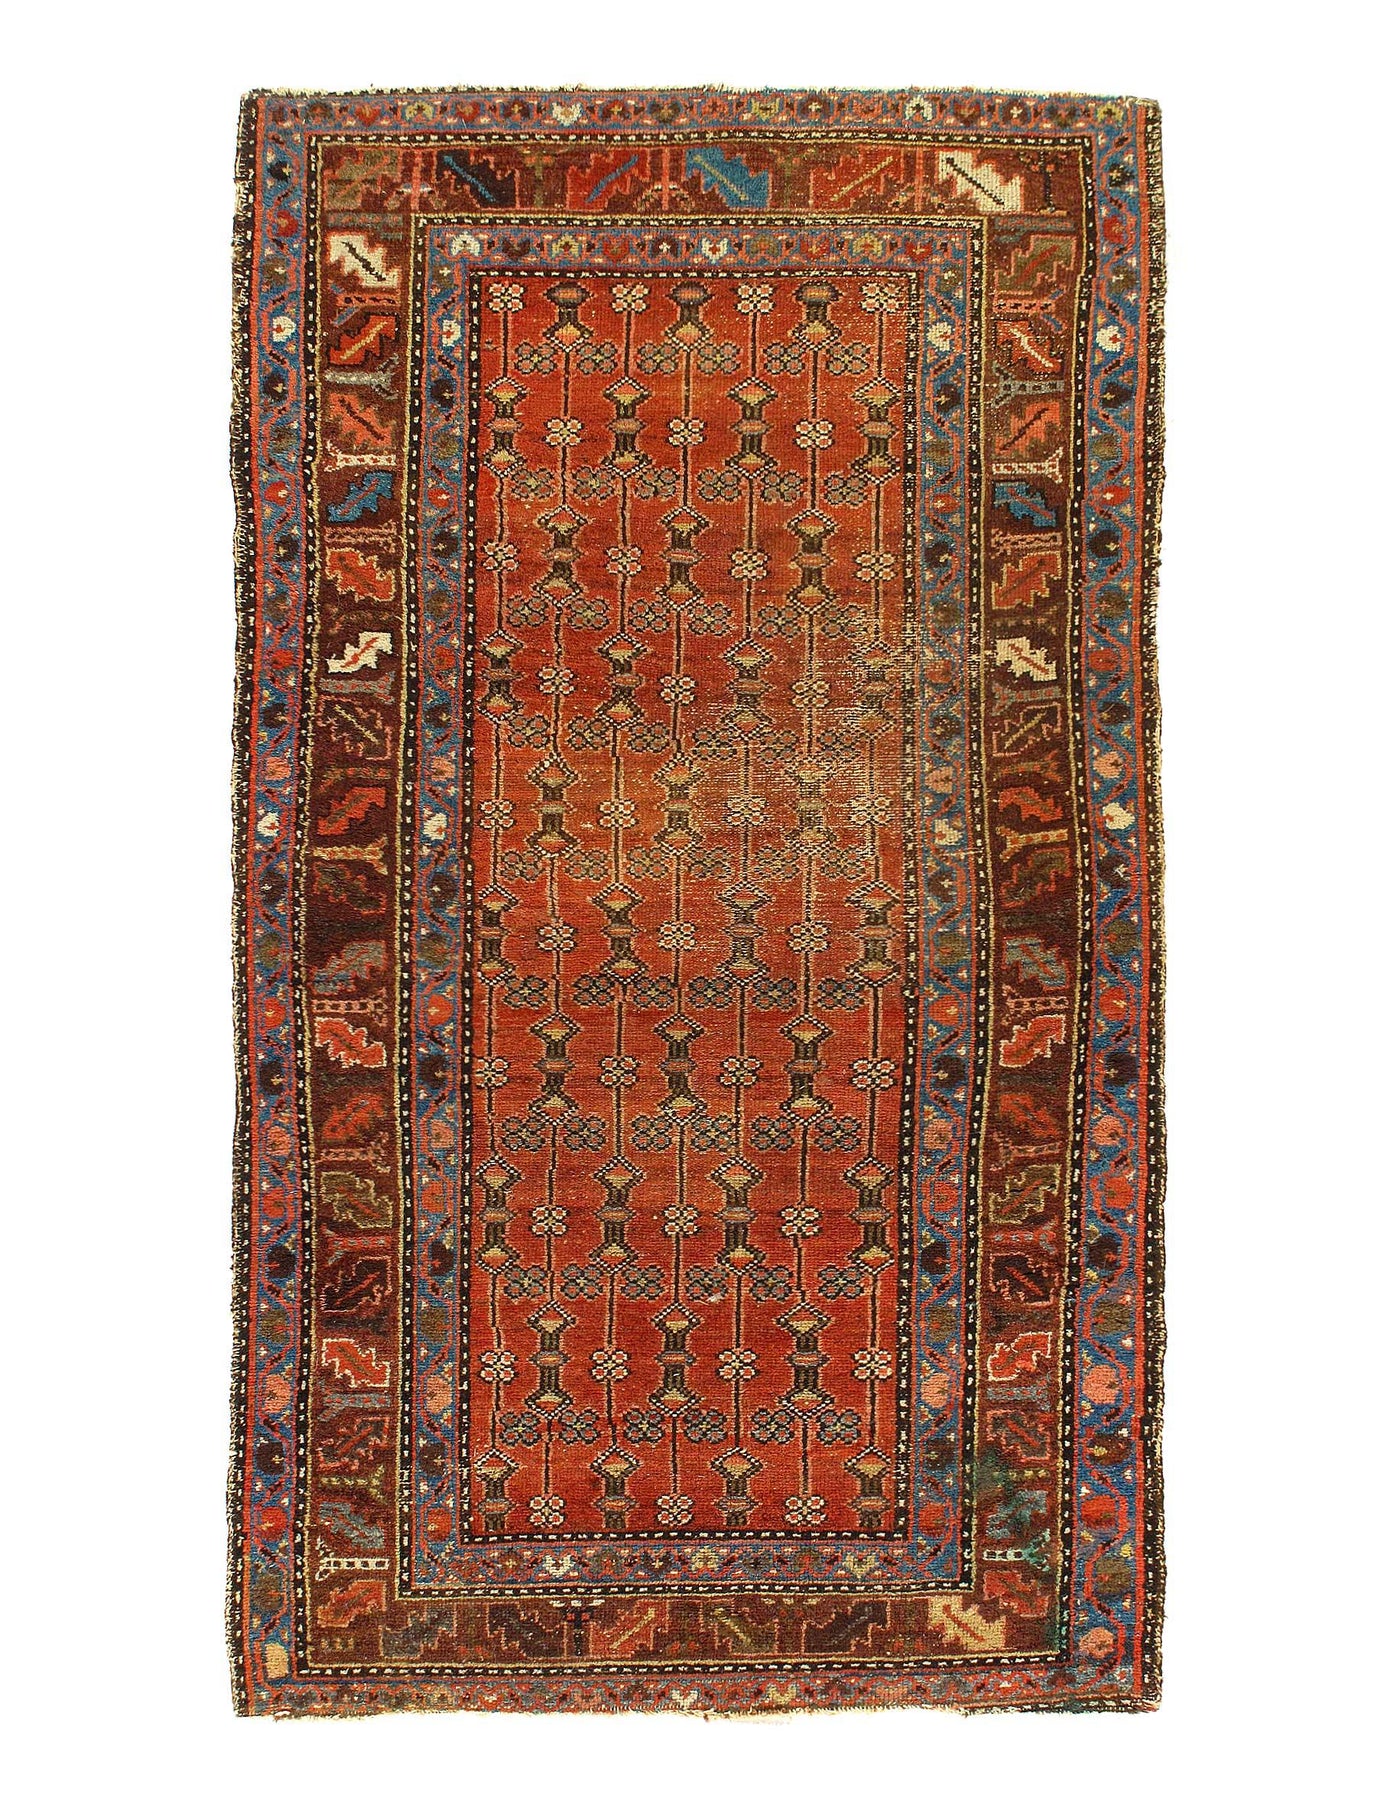 Canvello Antique Rust And Brown Rug For Living Room - 3'2'' X 5'11''